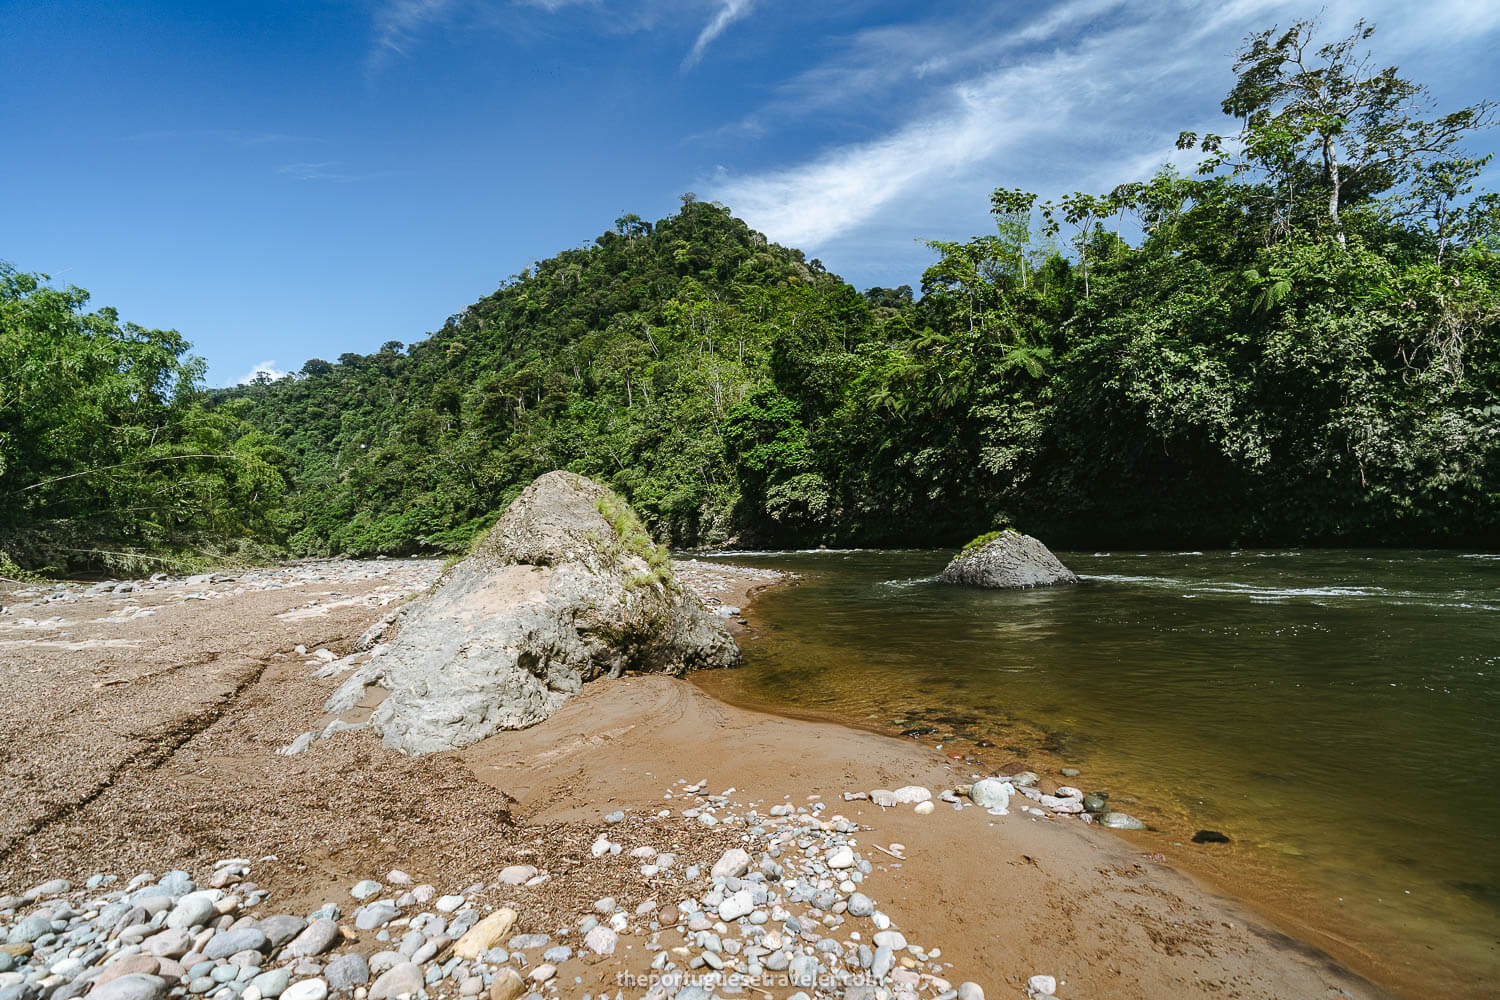 The Yuquianza River on low tide